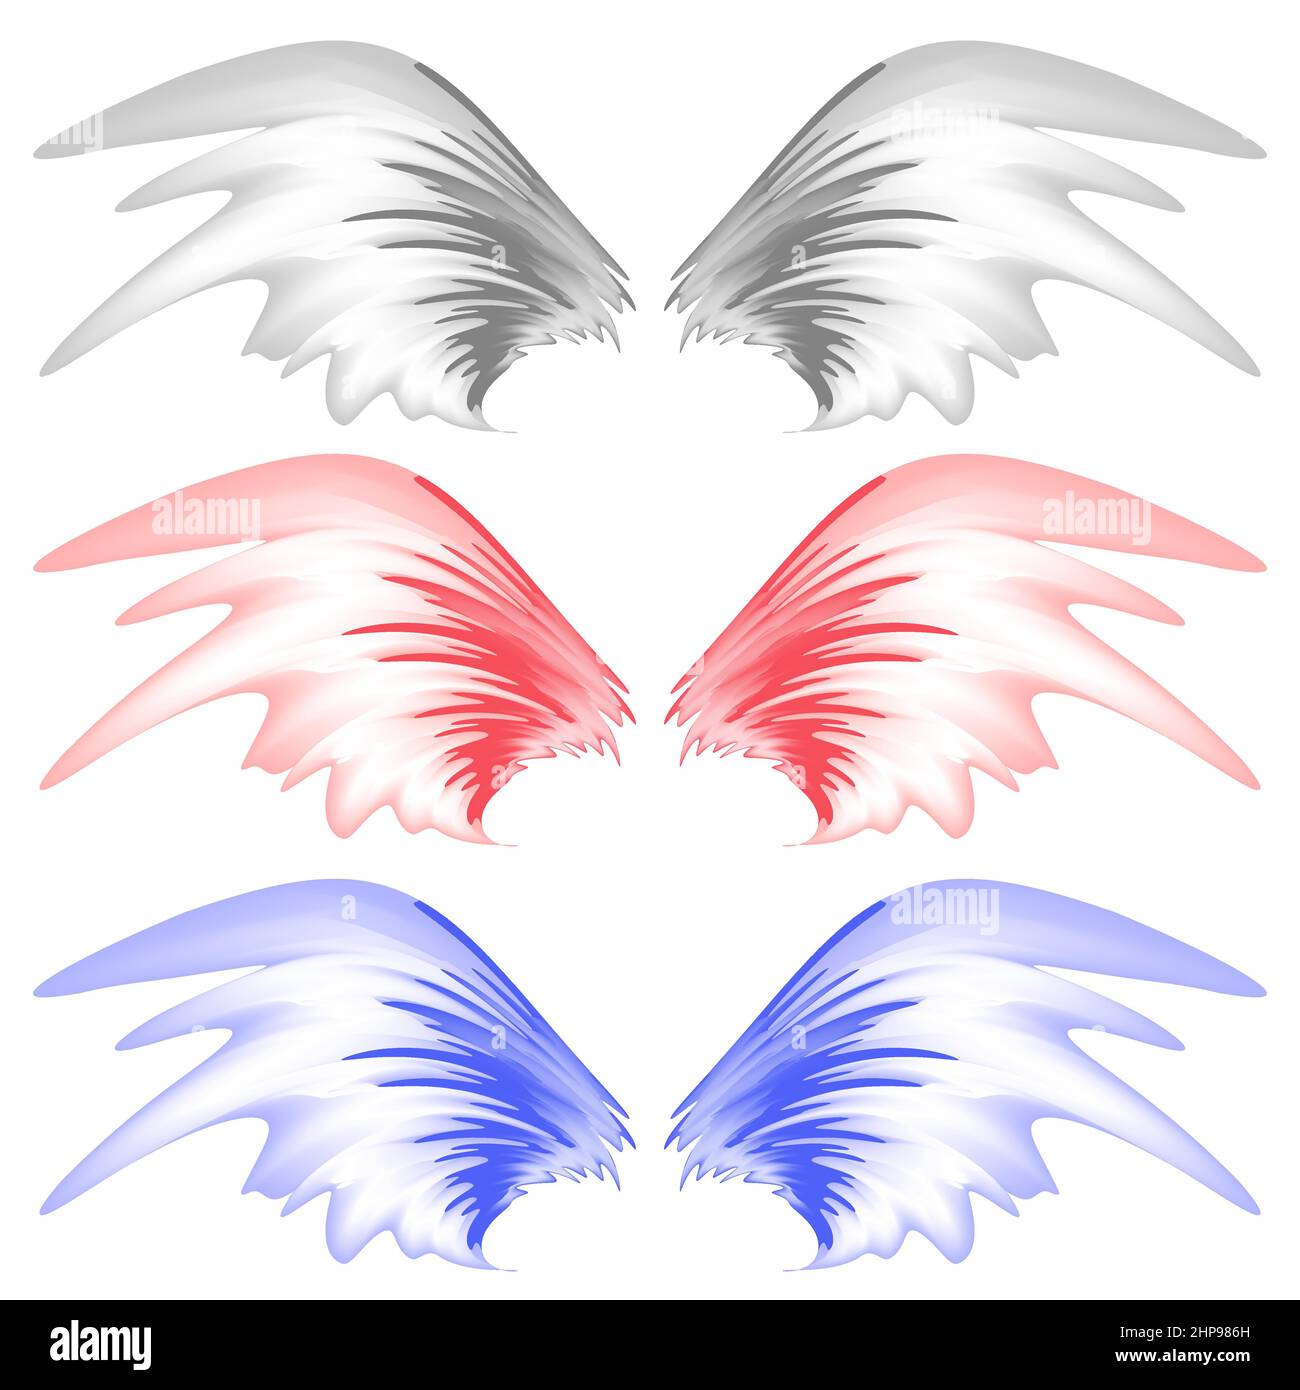 Angel or Phoenix Wings on White Background. Winged Logo Design. Part of Eagle Bird. Design Elements for Emblem, Sign, Brand Mark. Stock Vector